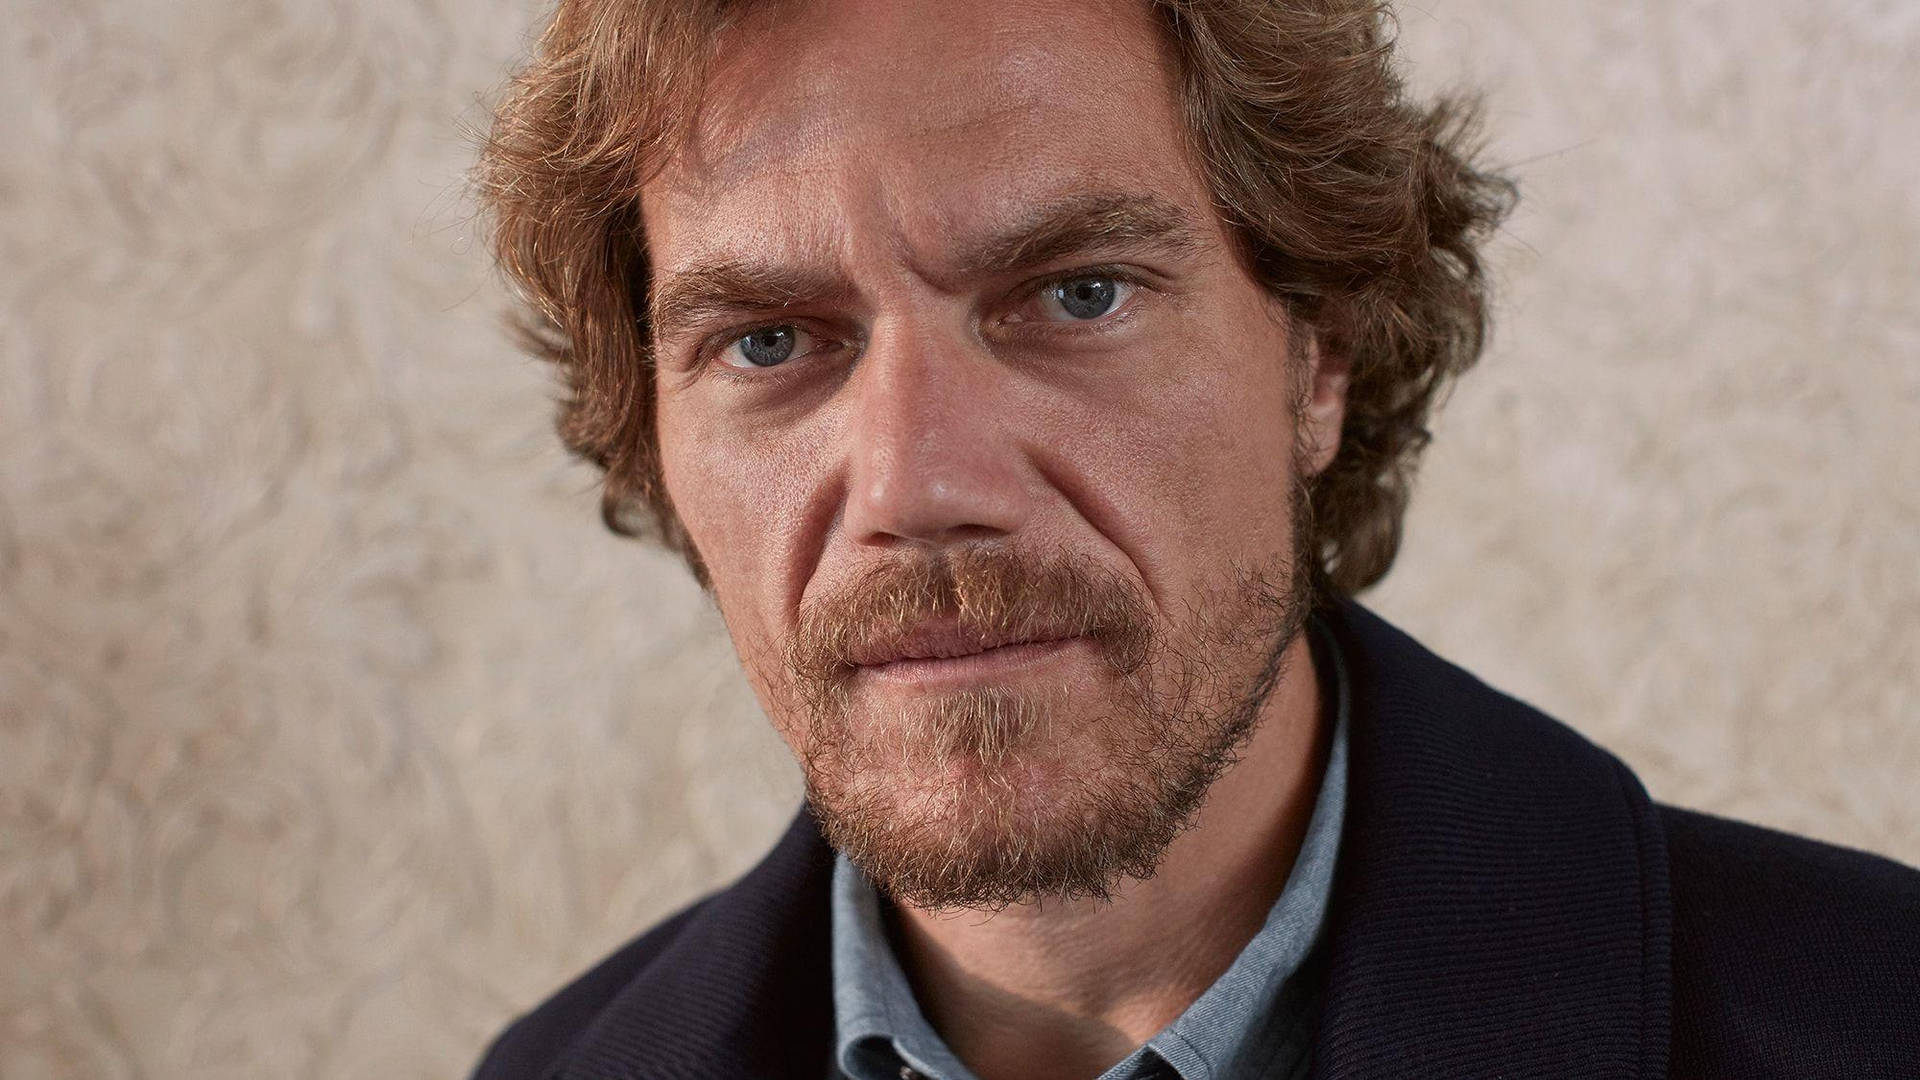 Actor And Director Michael Shannon Wallpaper